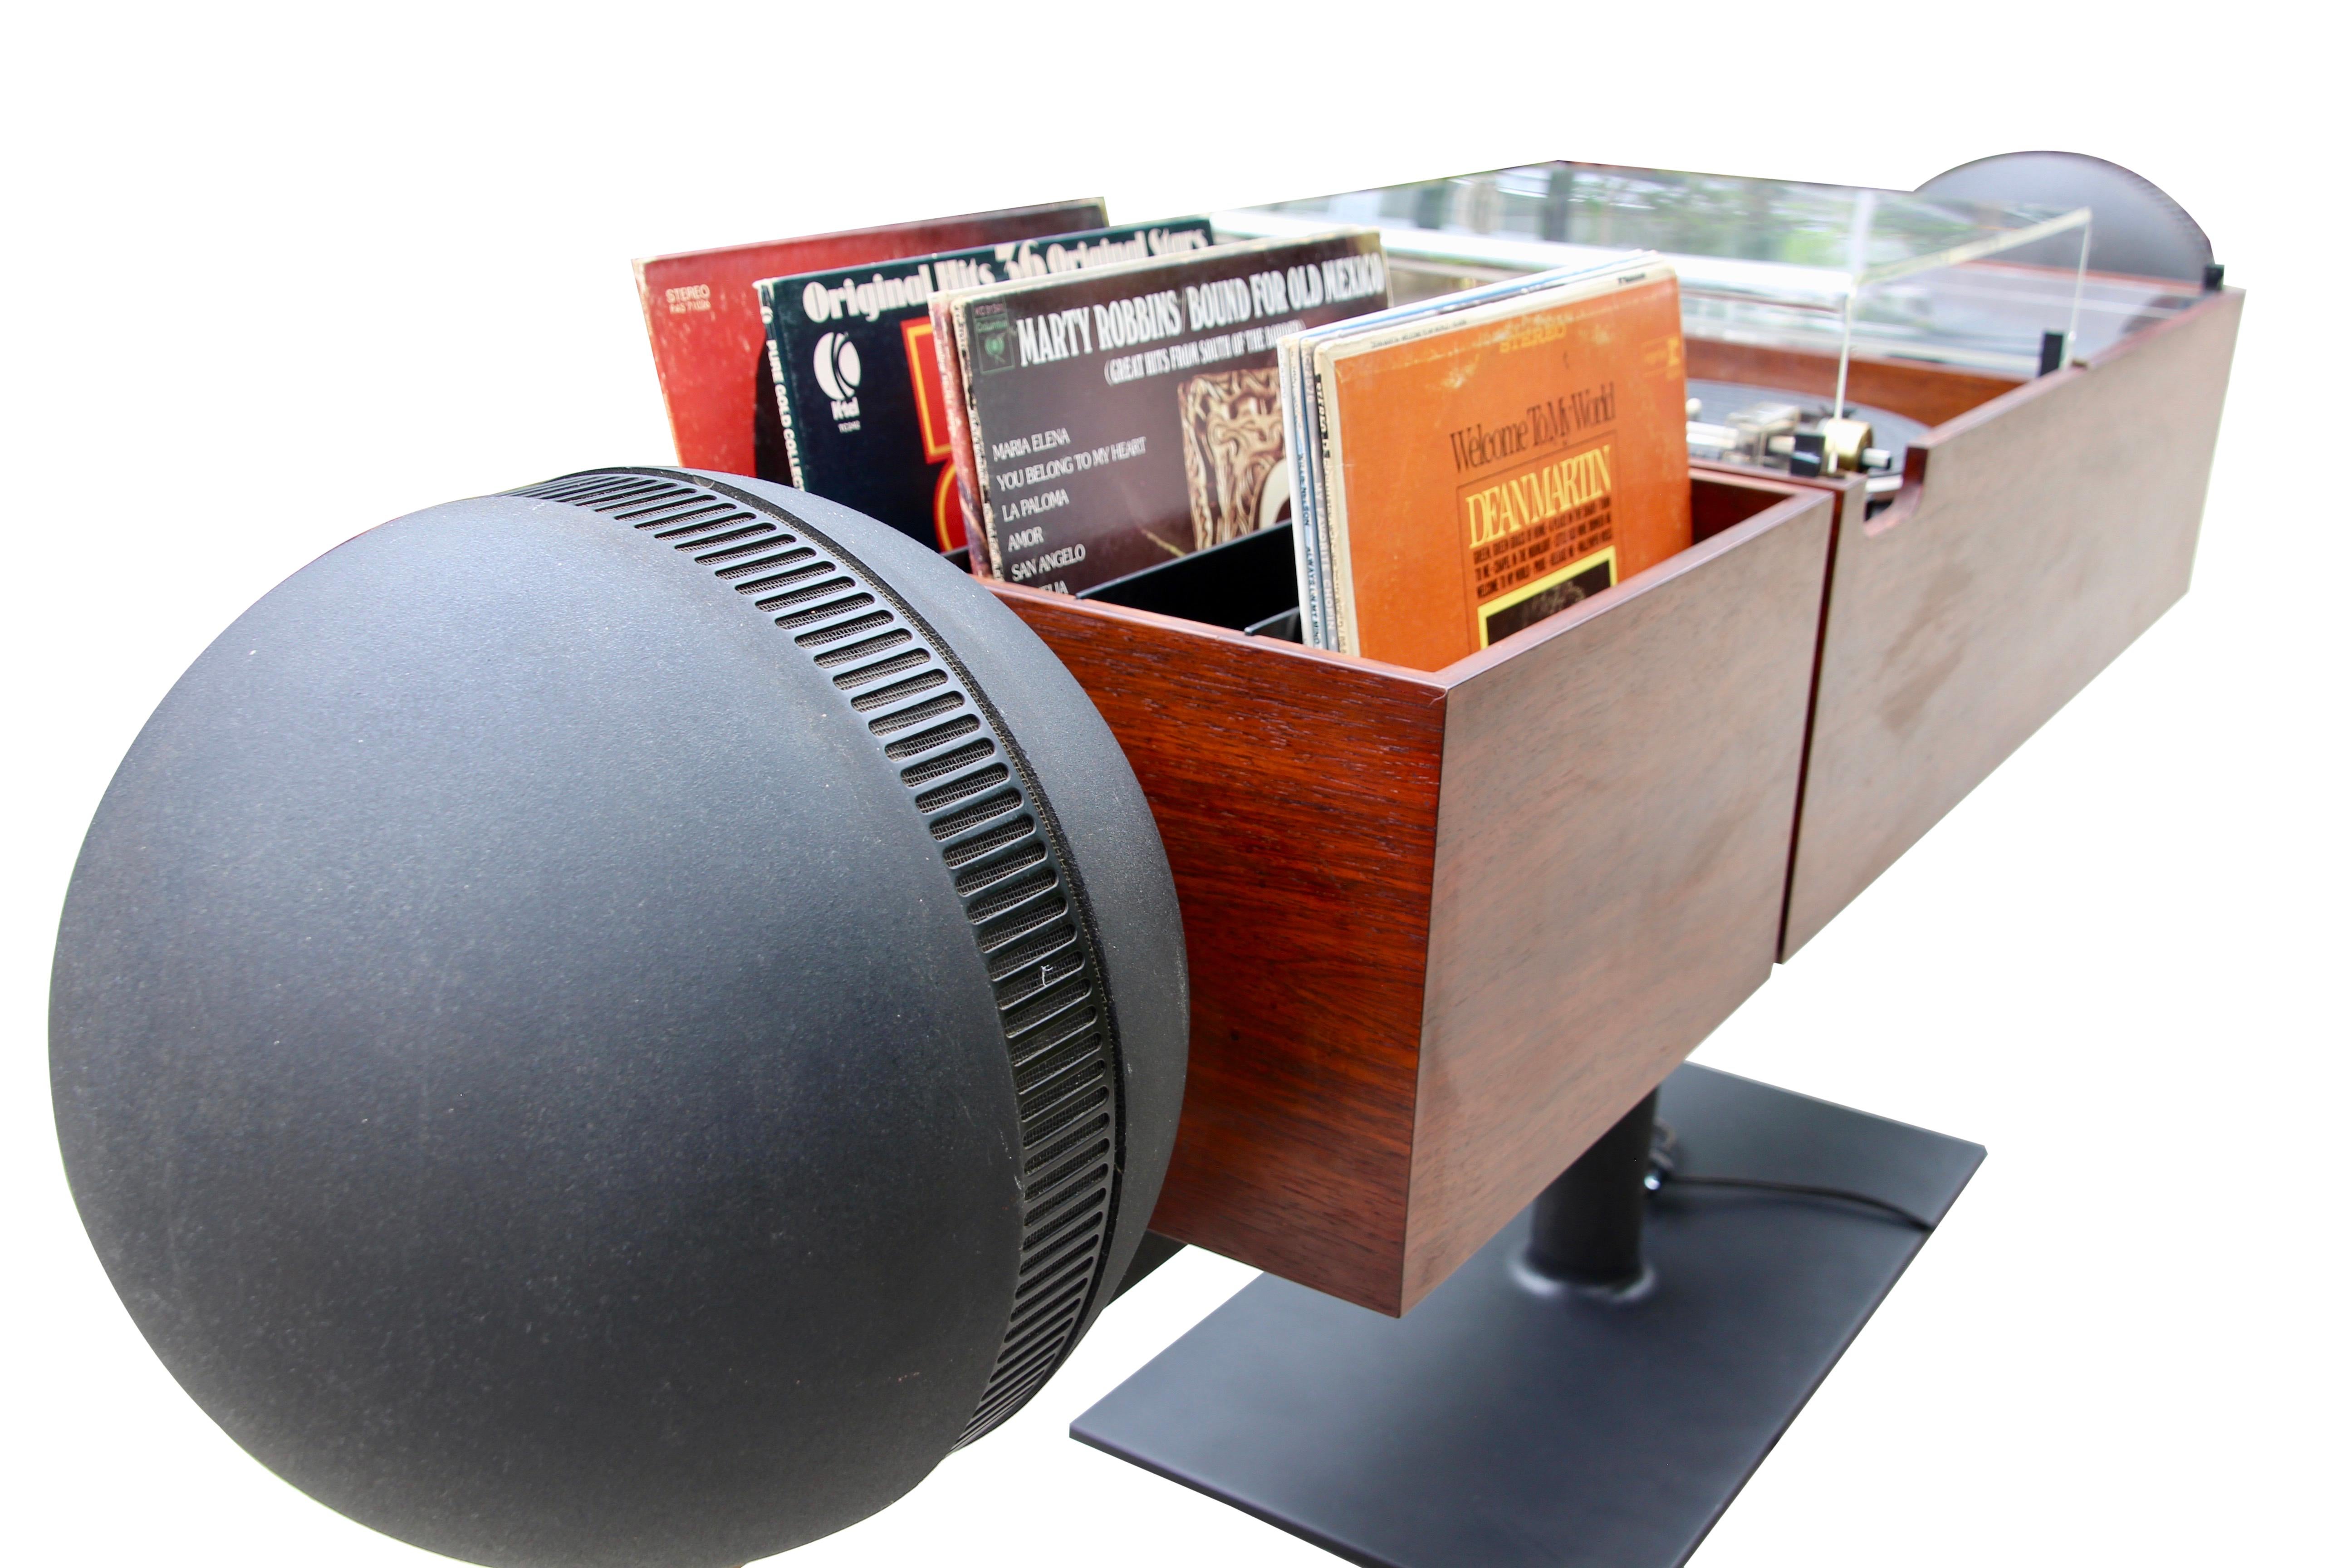 Clairtone Project G2 Series T11 Console Stereo System & Garrard Turntable en vente 1